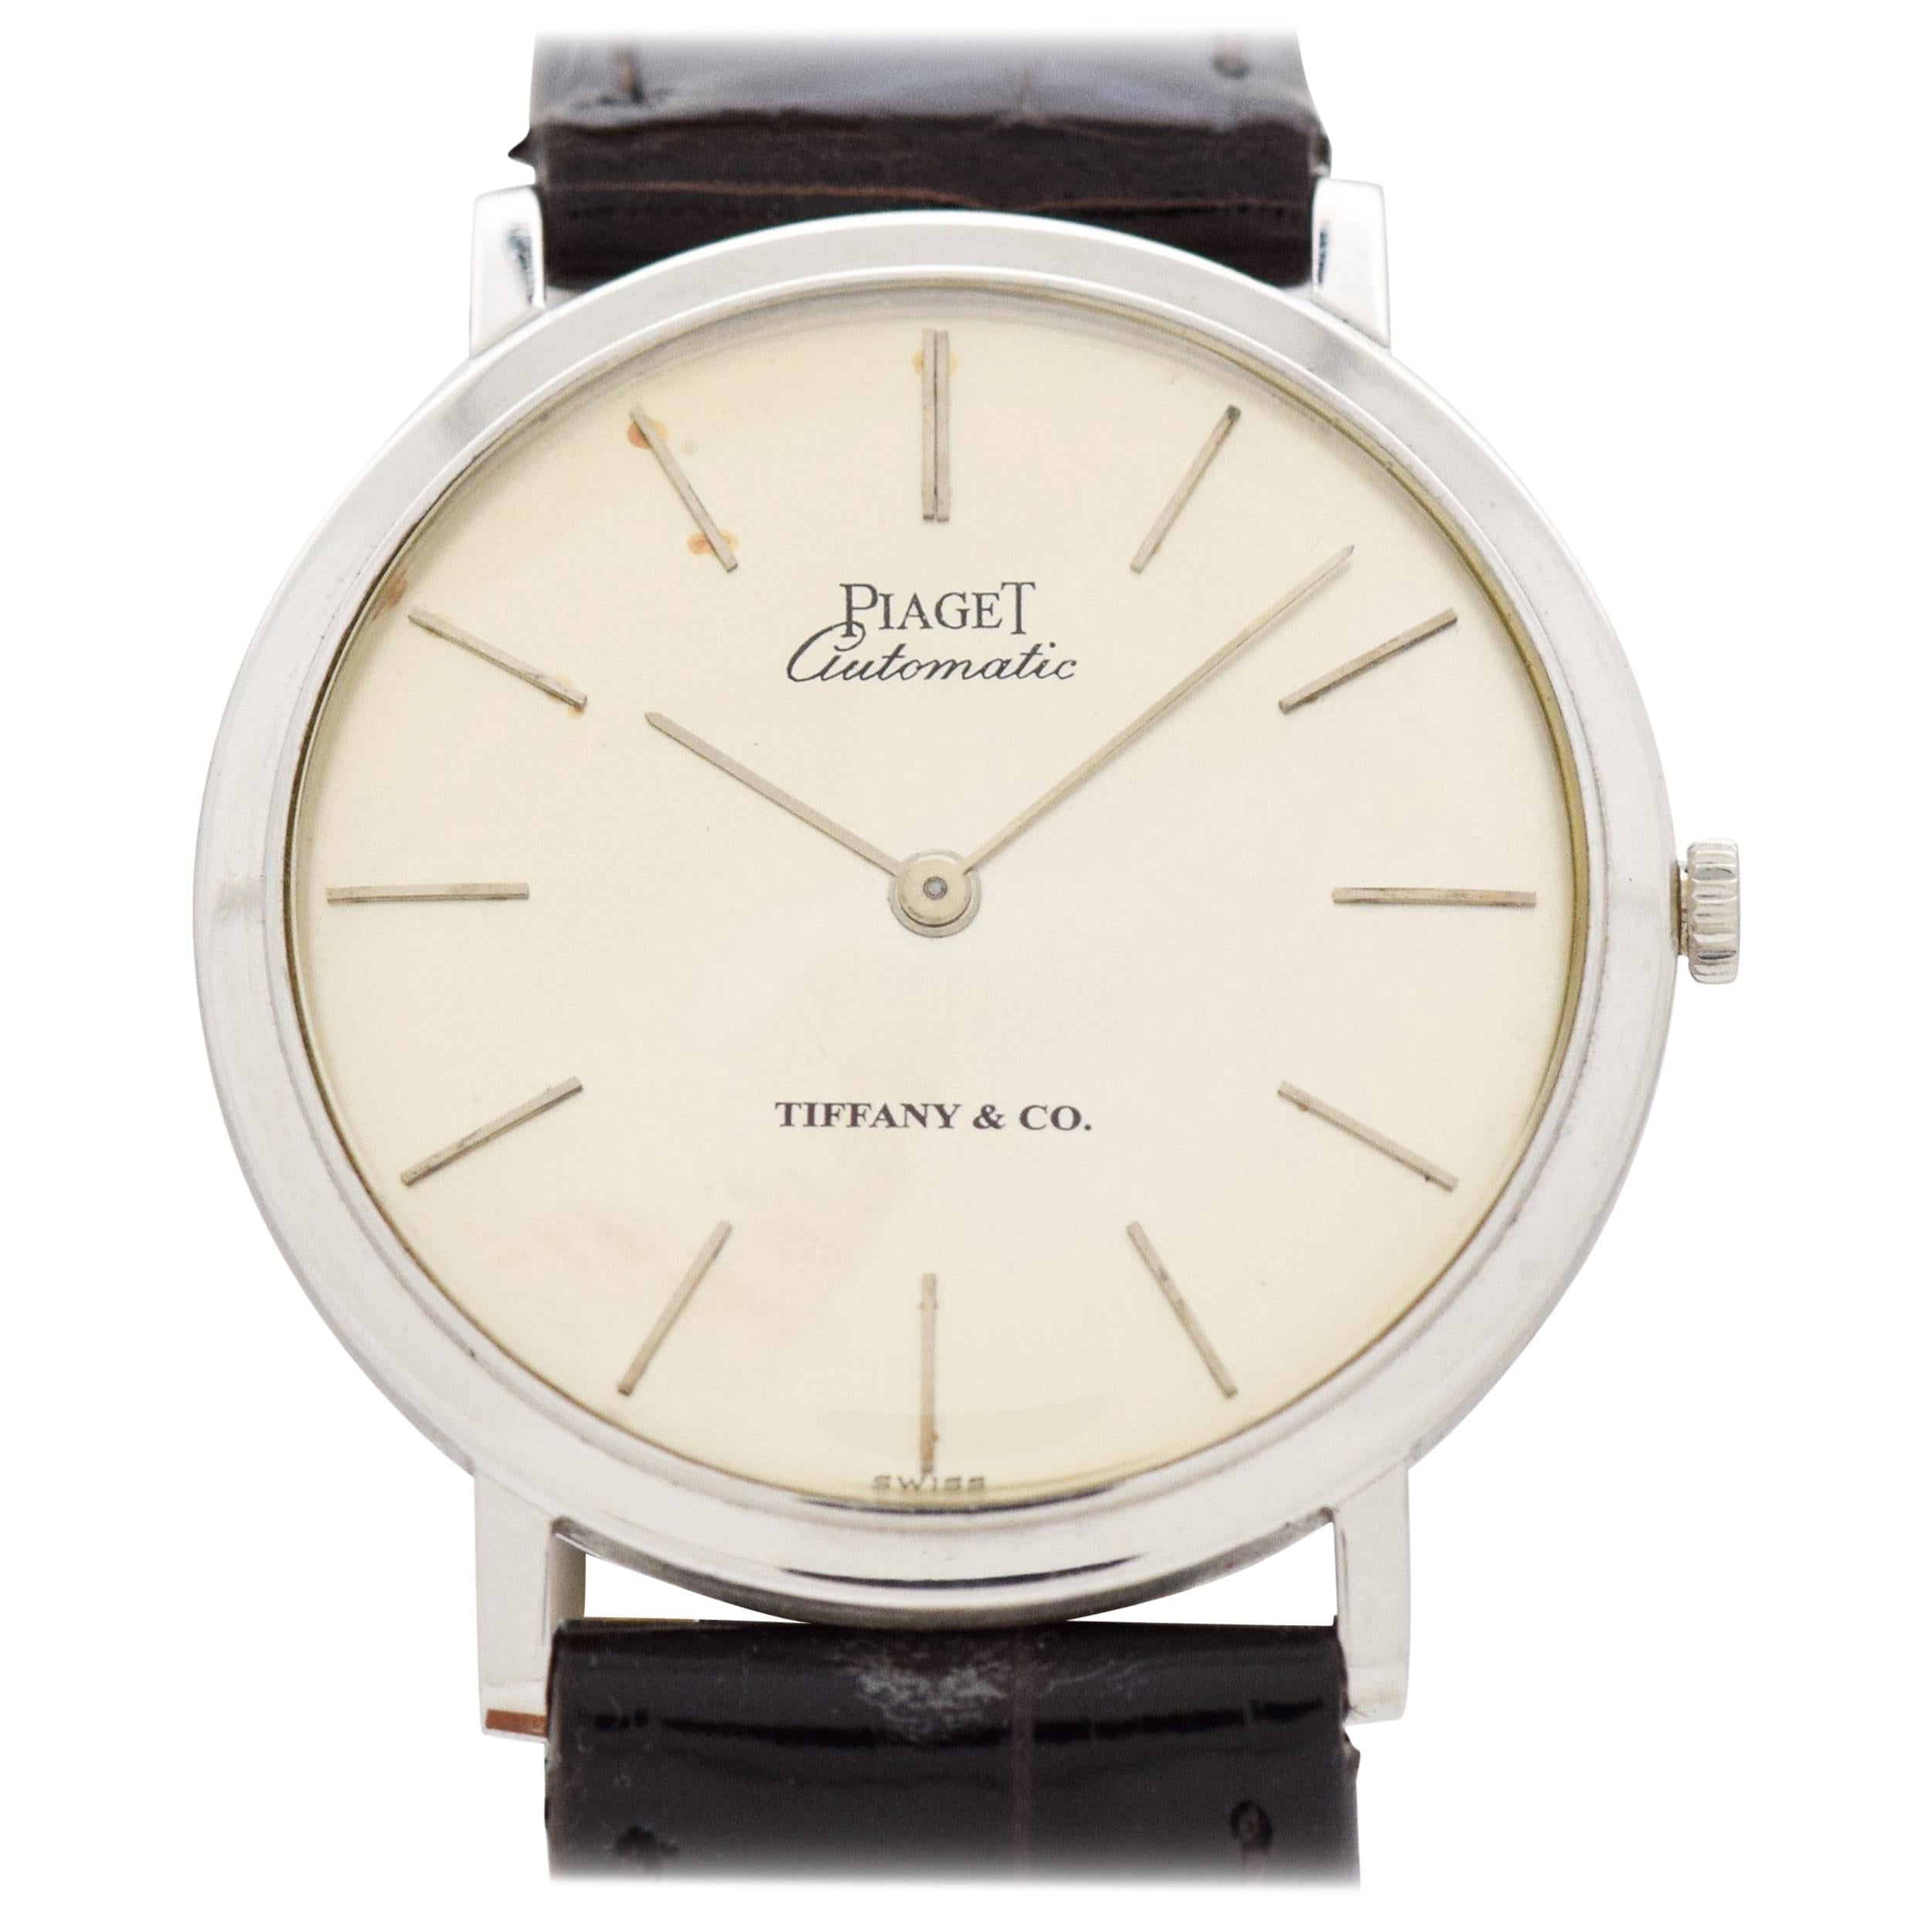 Vintage Piaget Ultra-Thinomatic 18 Karat Gold Watch Retailed by Tiffany & Co.